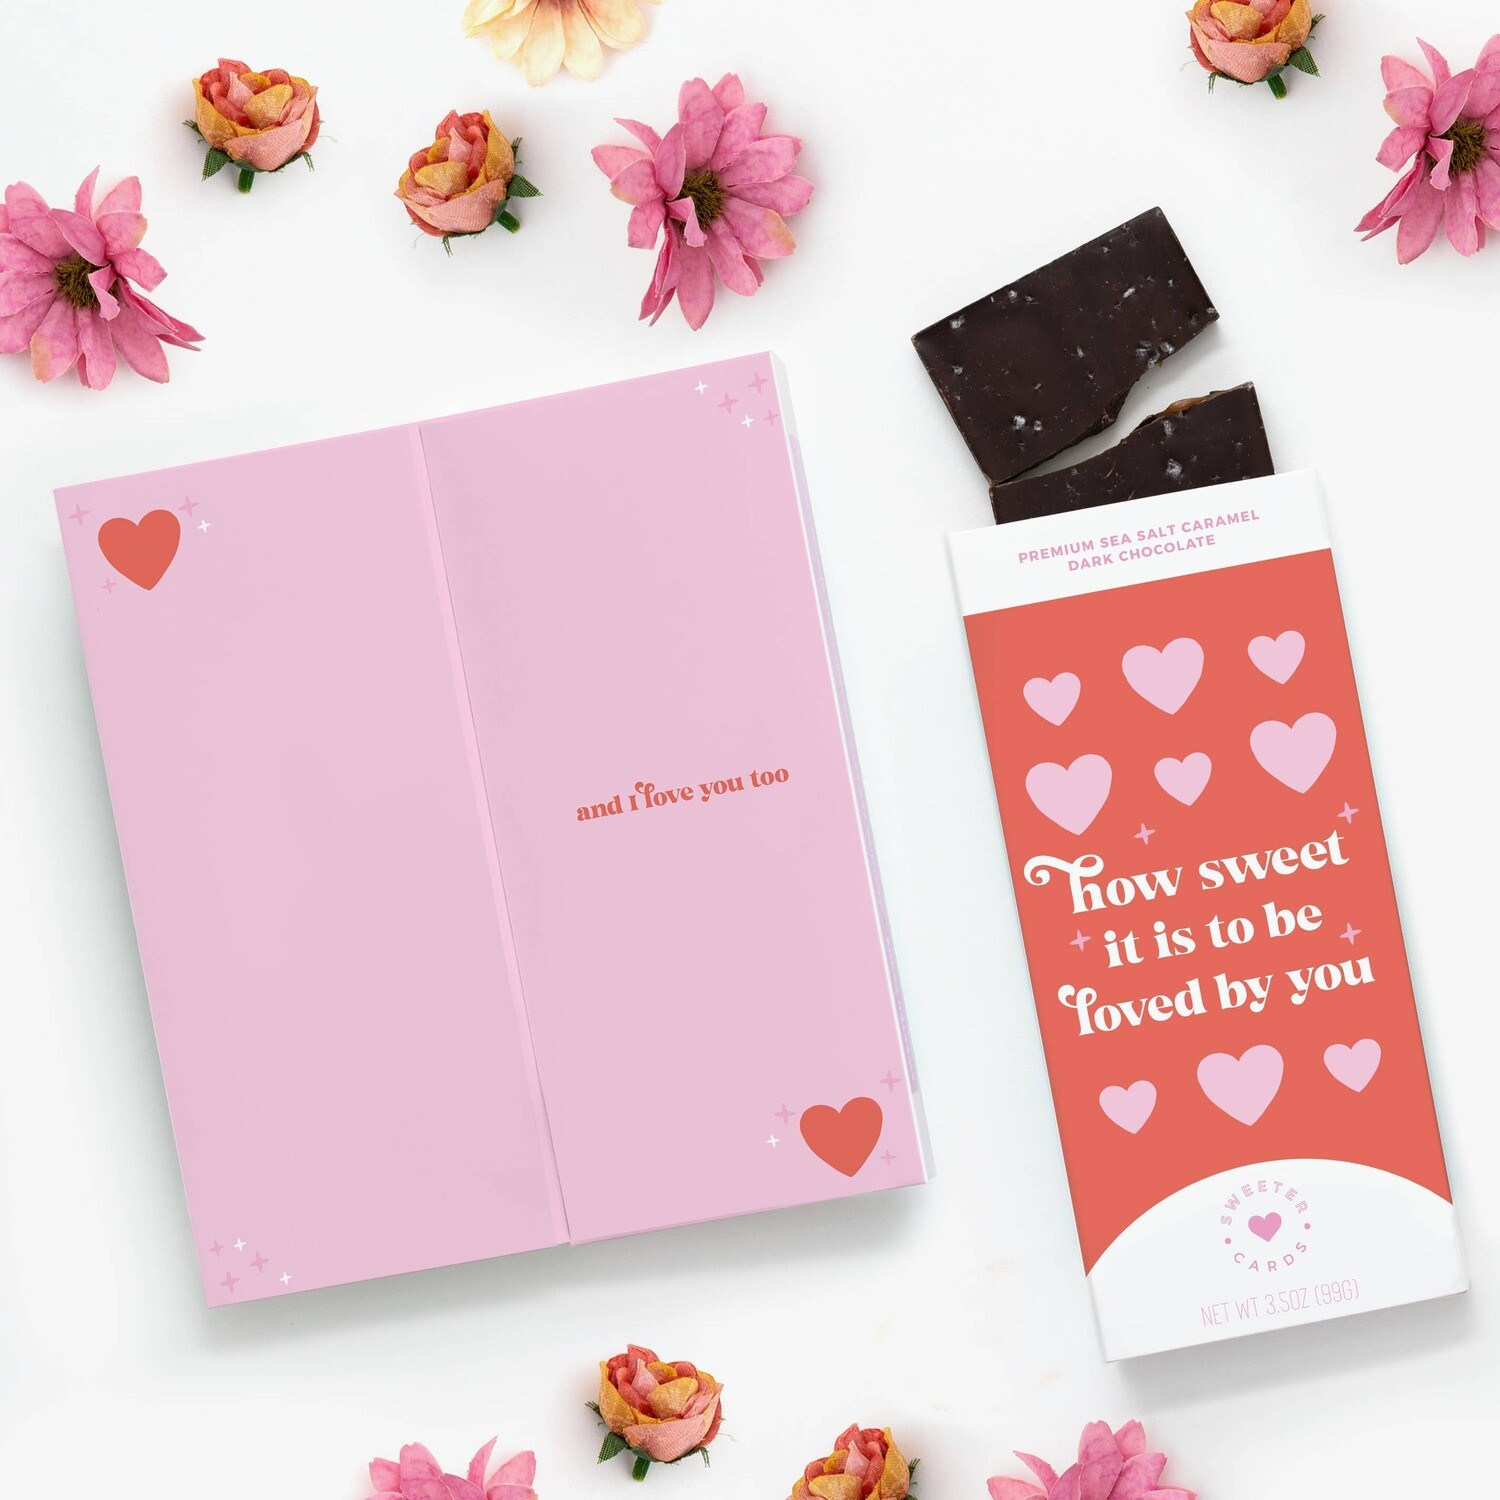 Sweeter Greeting Cards with a Chocolate Bar inside